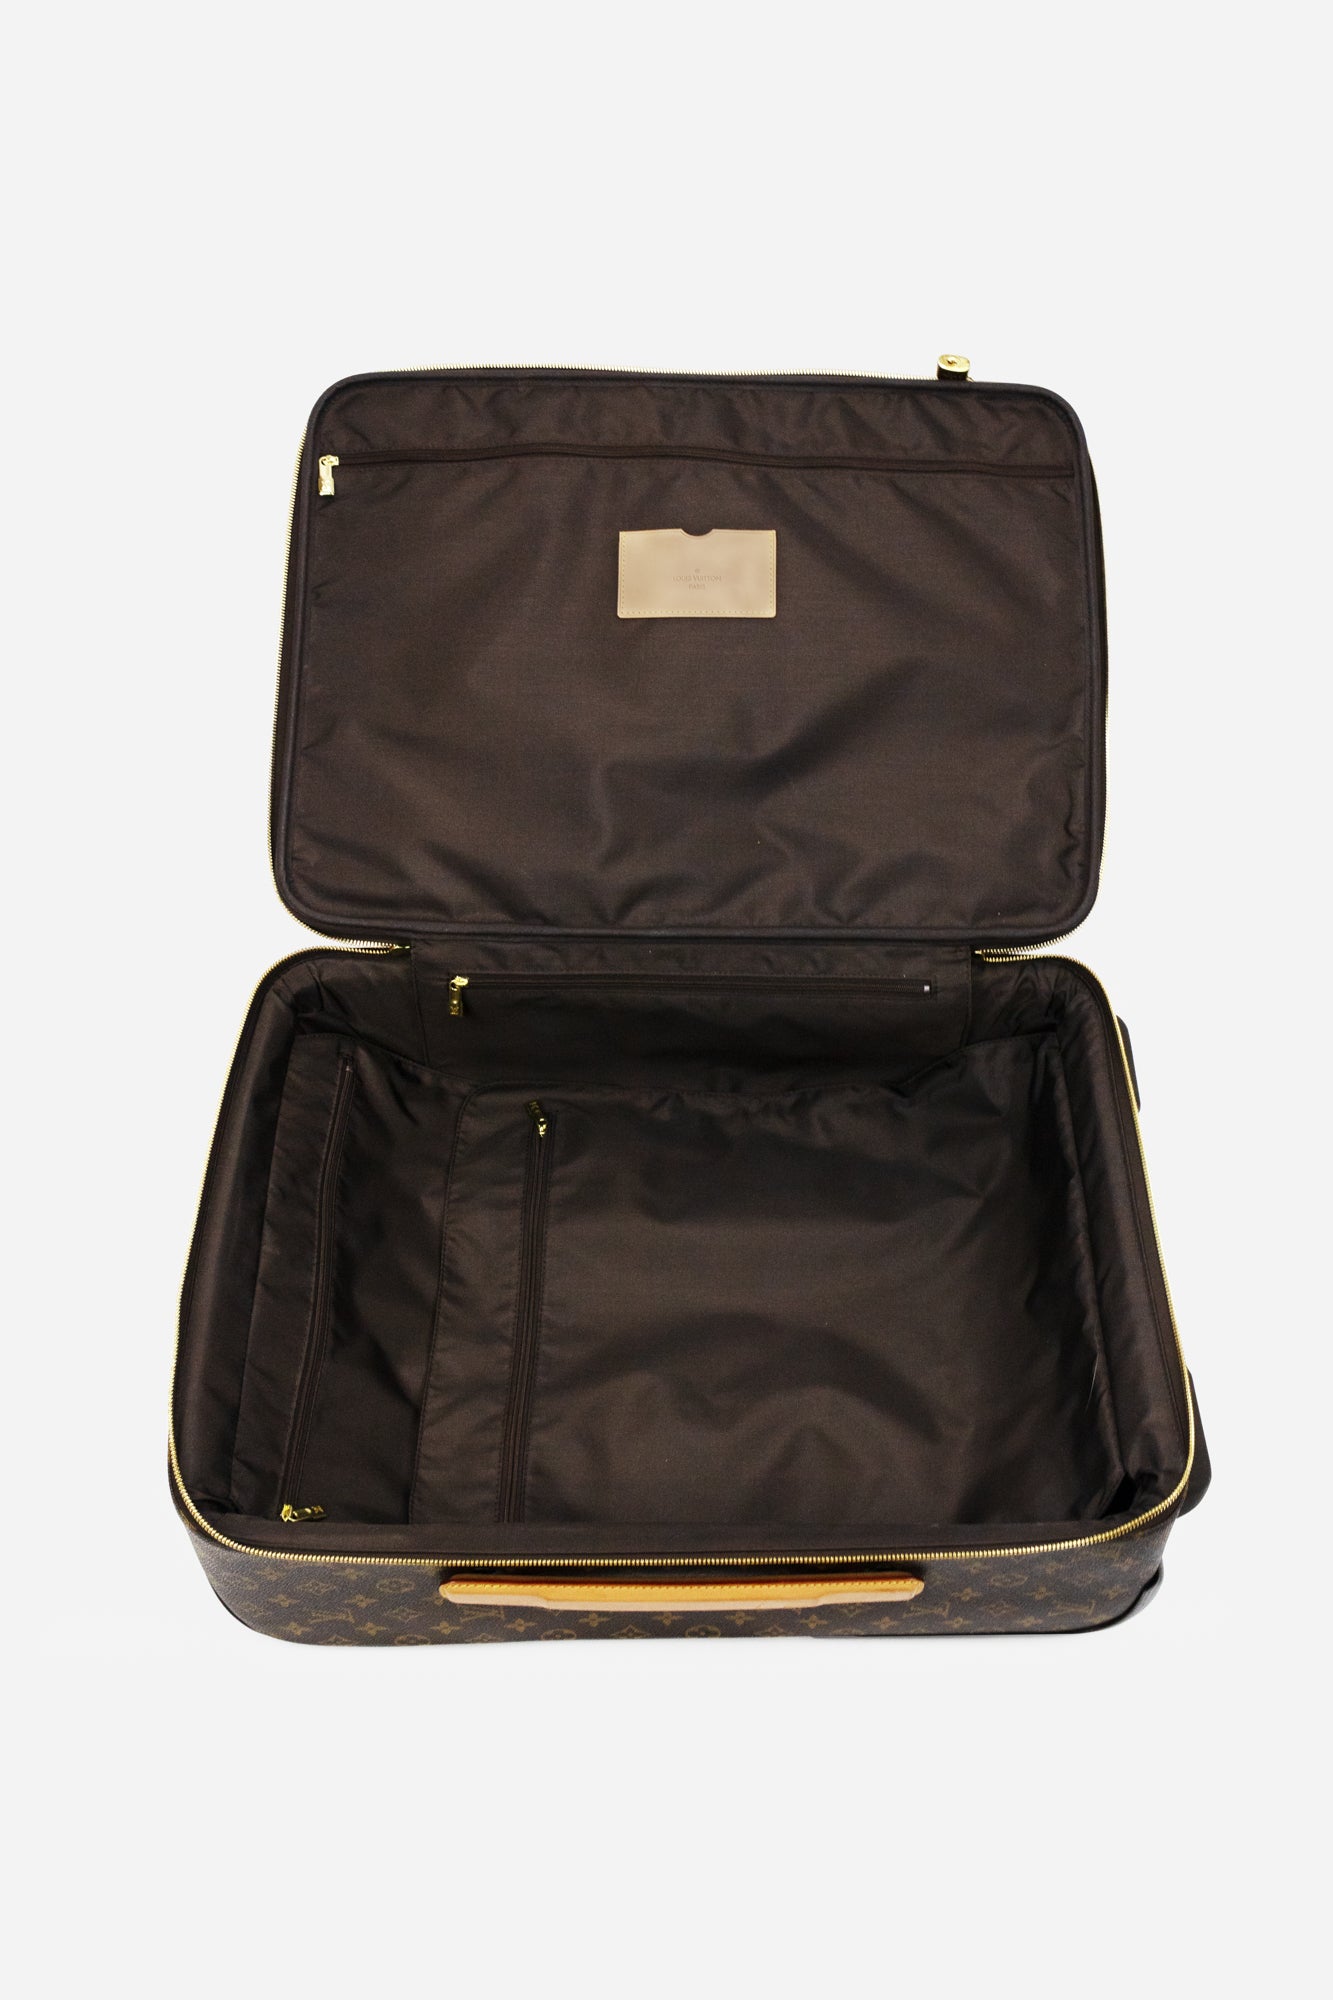 Pégase 55 Business Monogram Luggage with Travel Cover